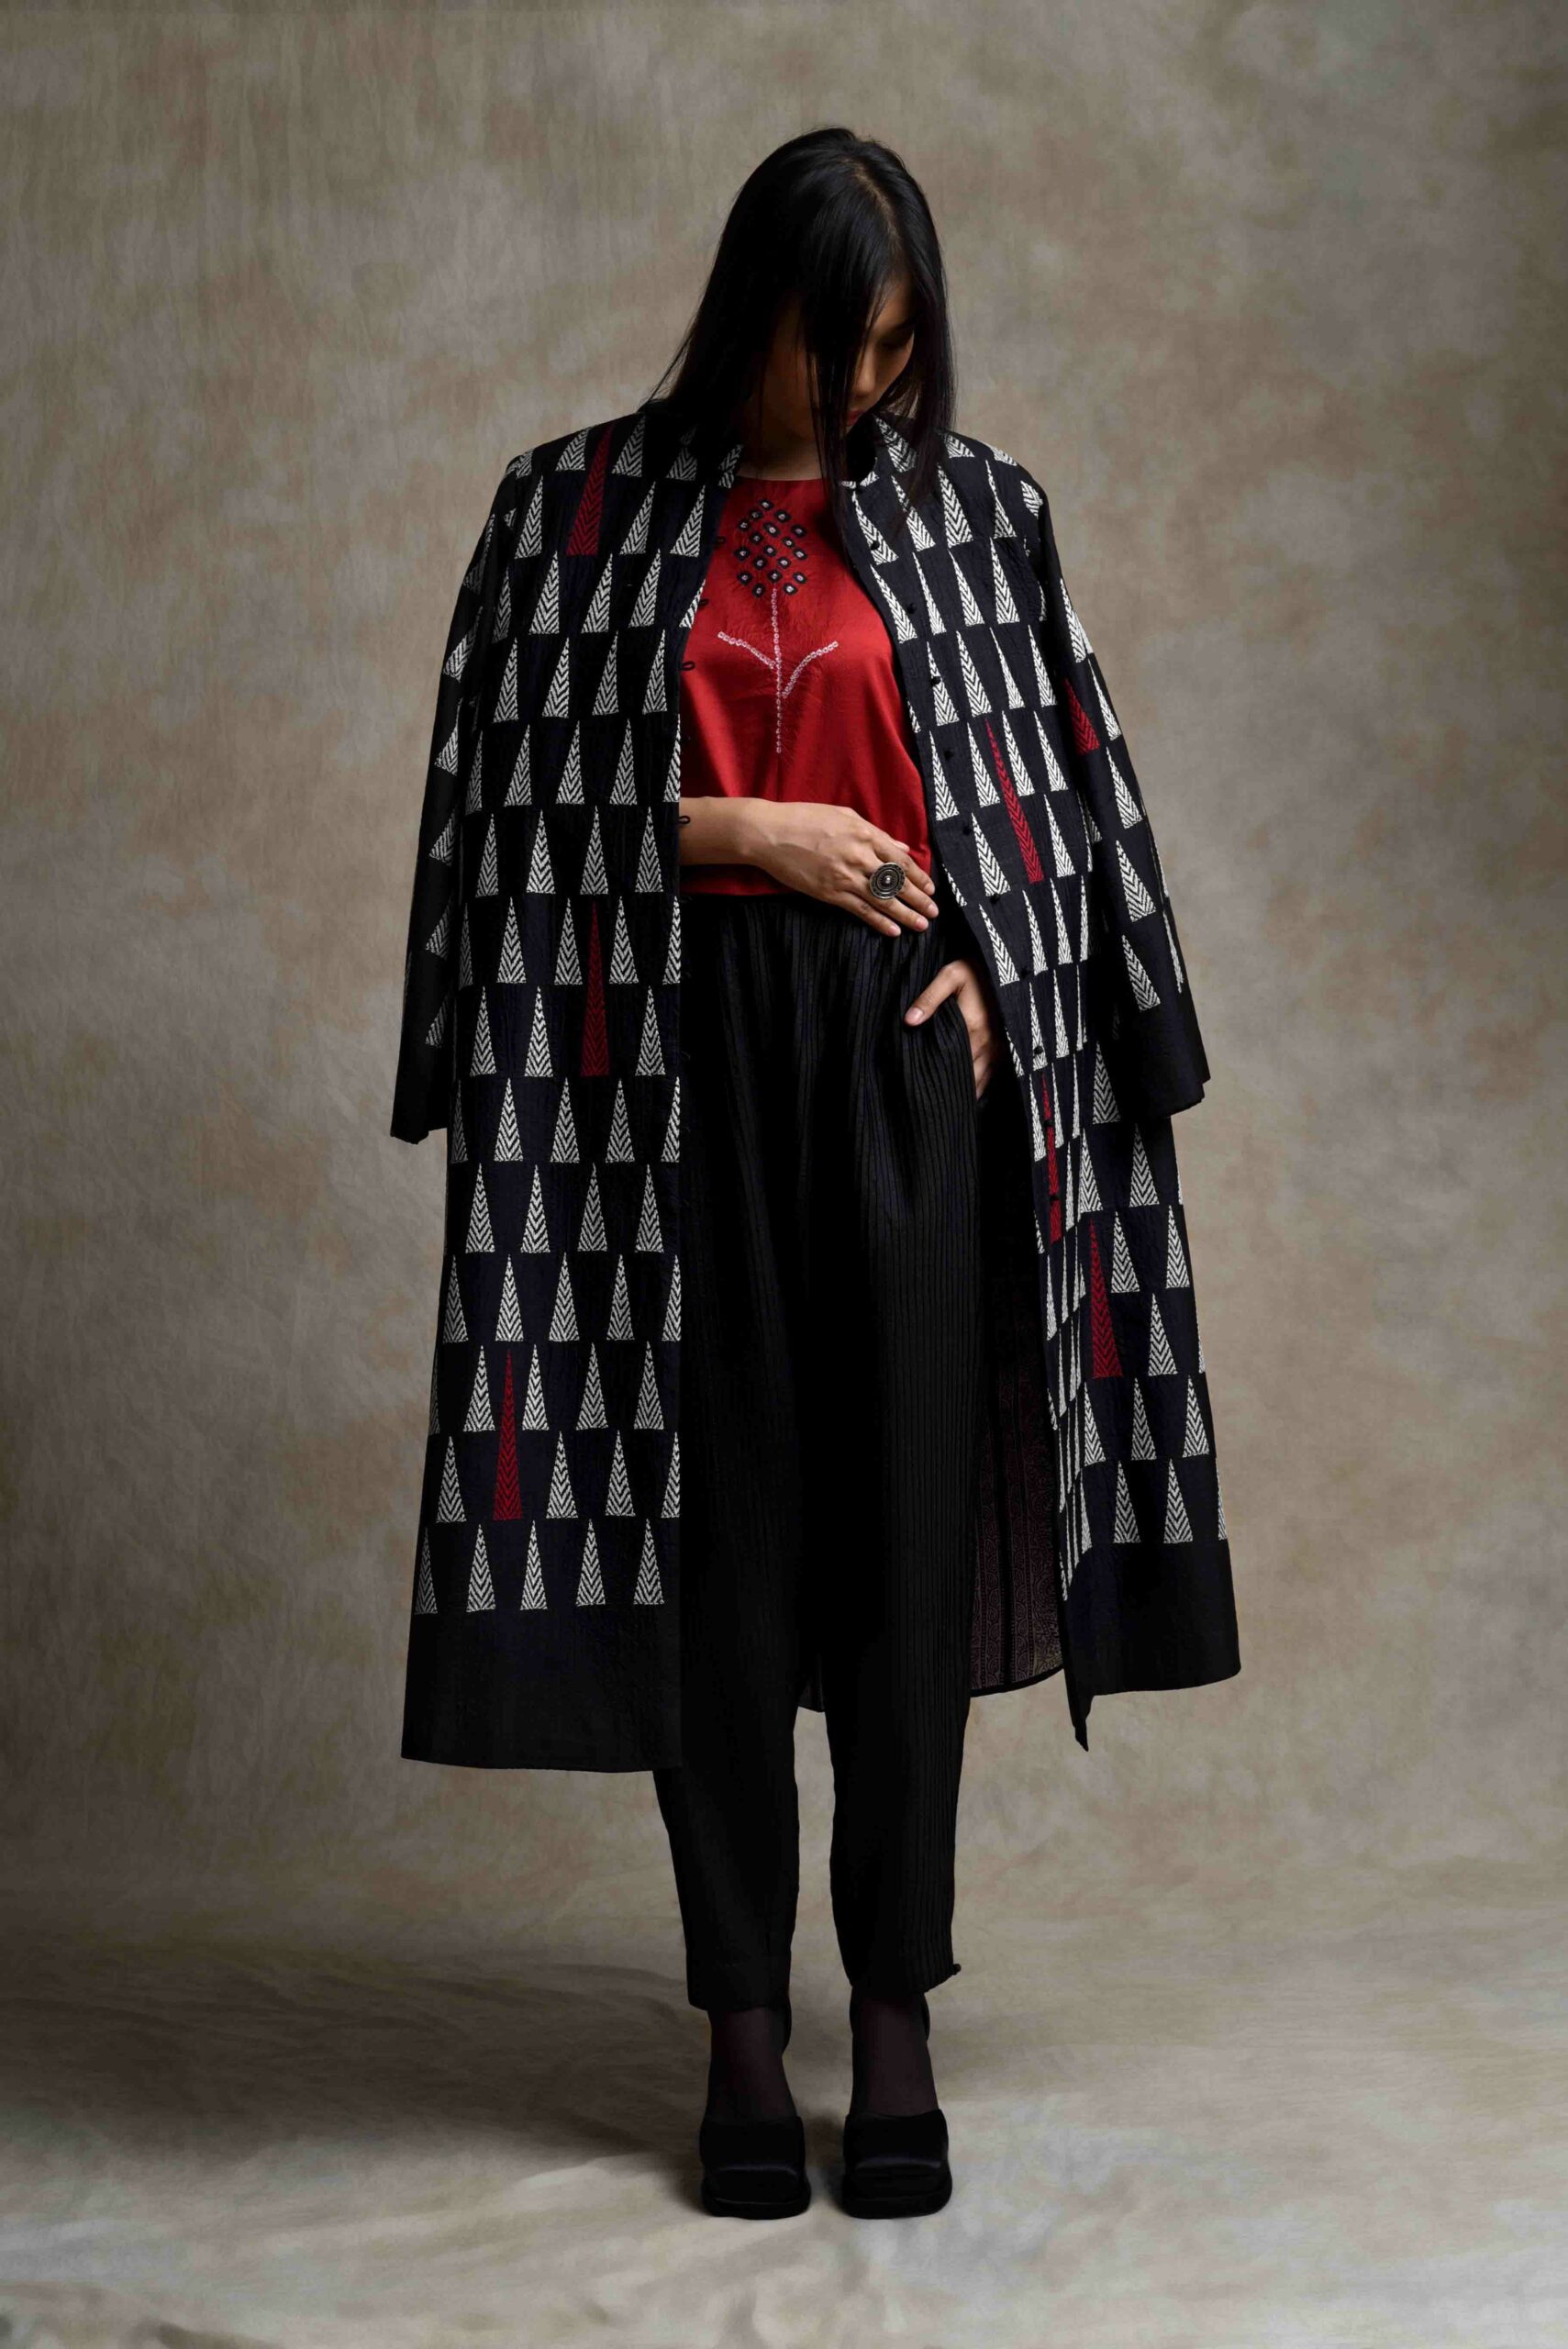 One of Sunita favourite pieces is this long jacket with embroidered triangles. (Supplied)